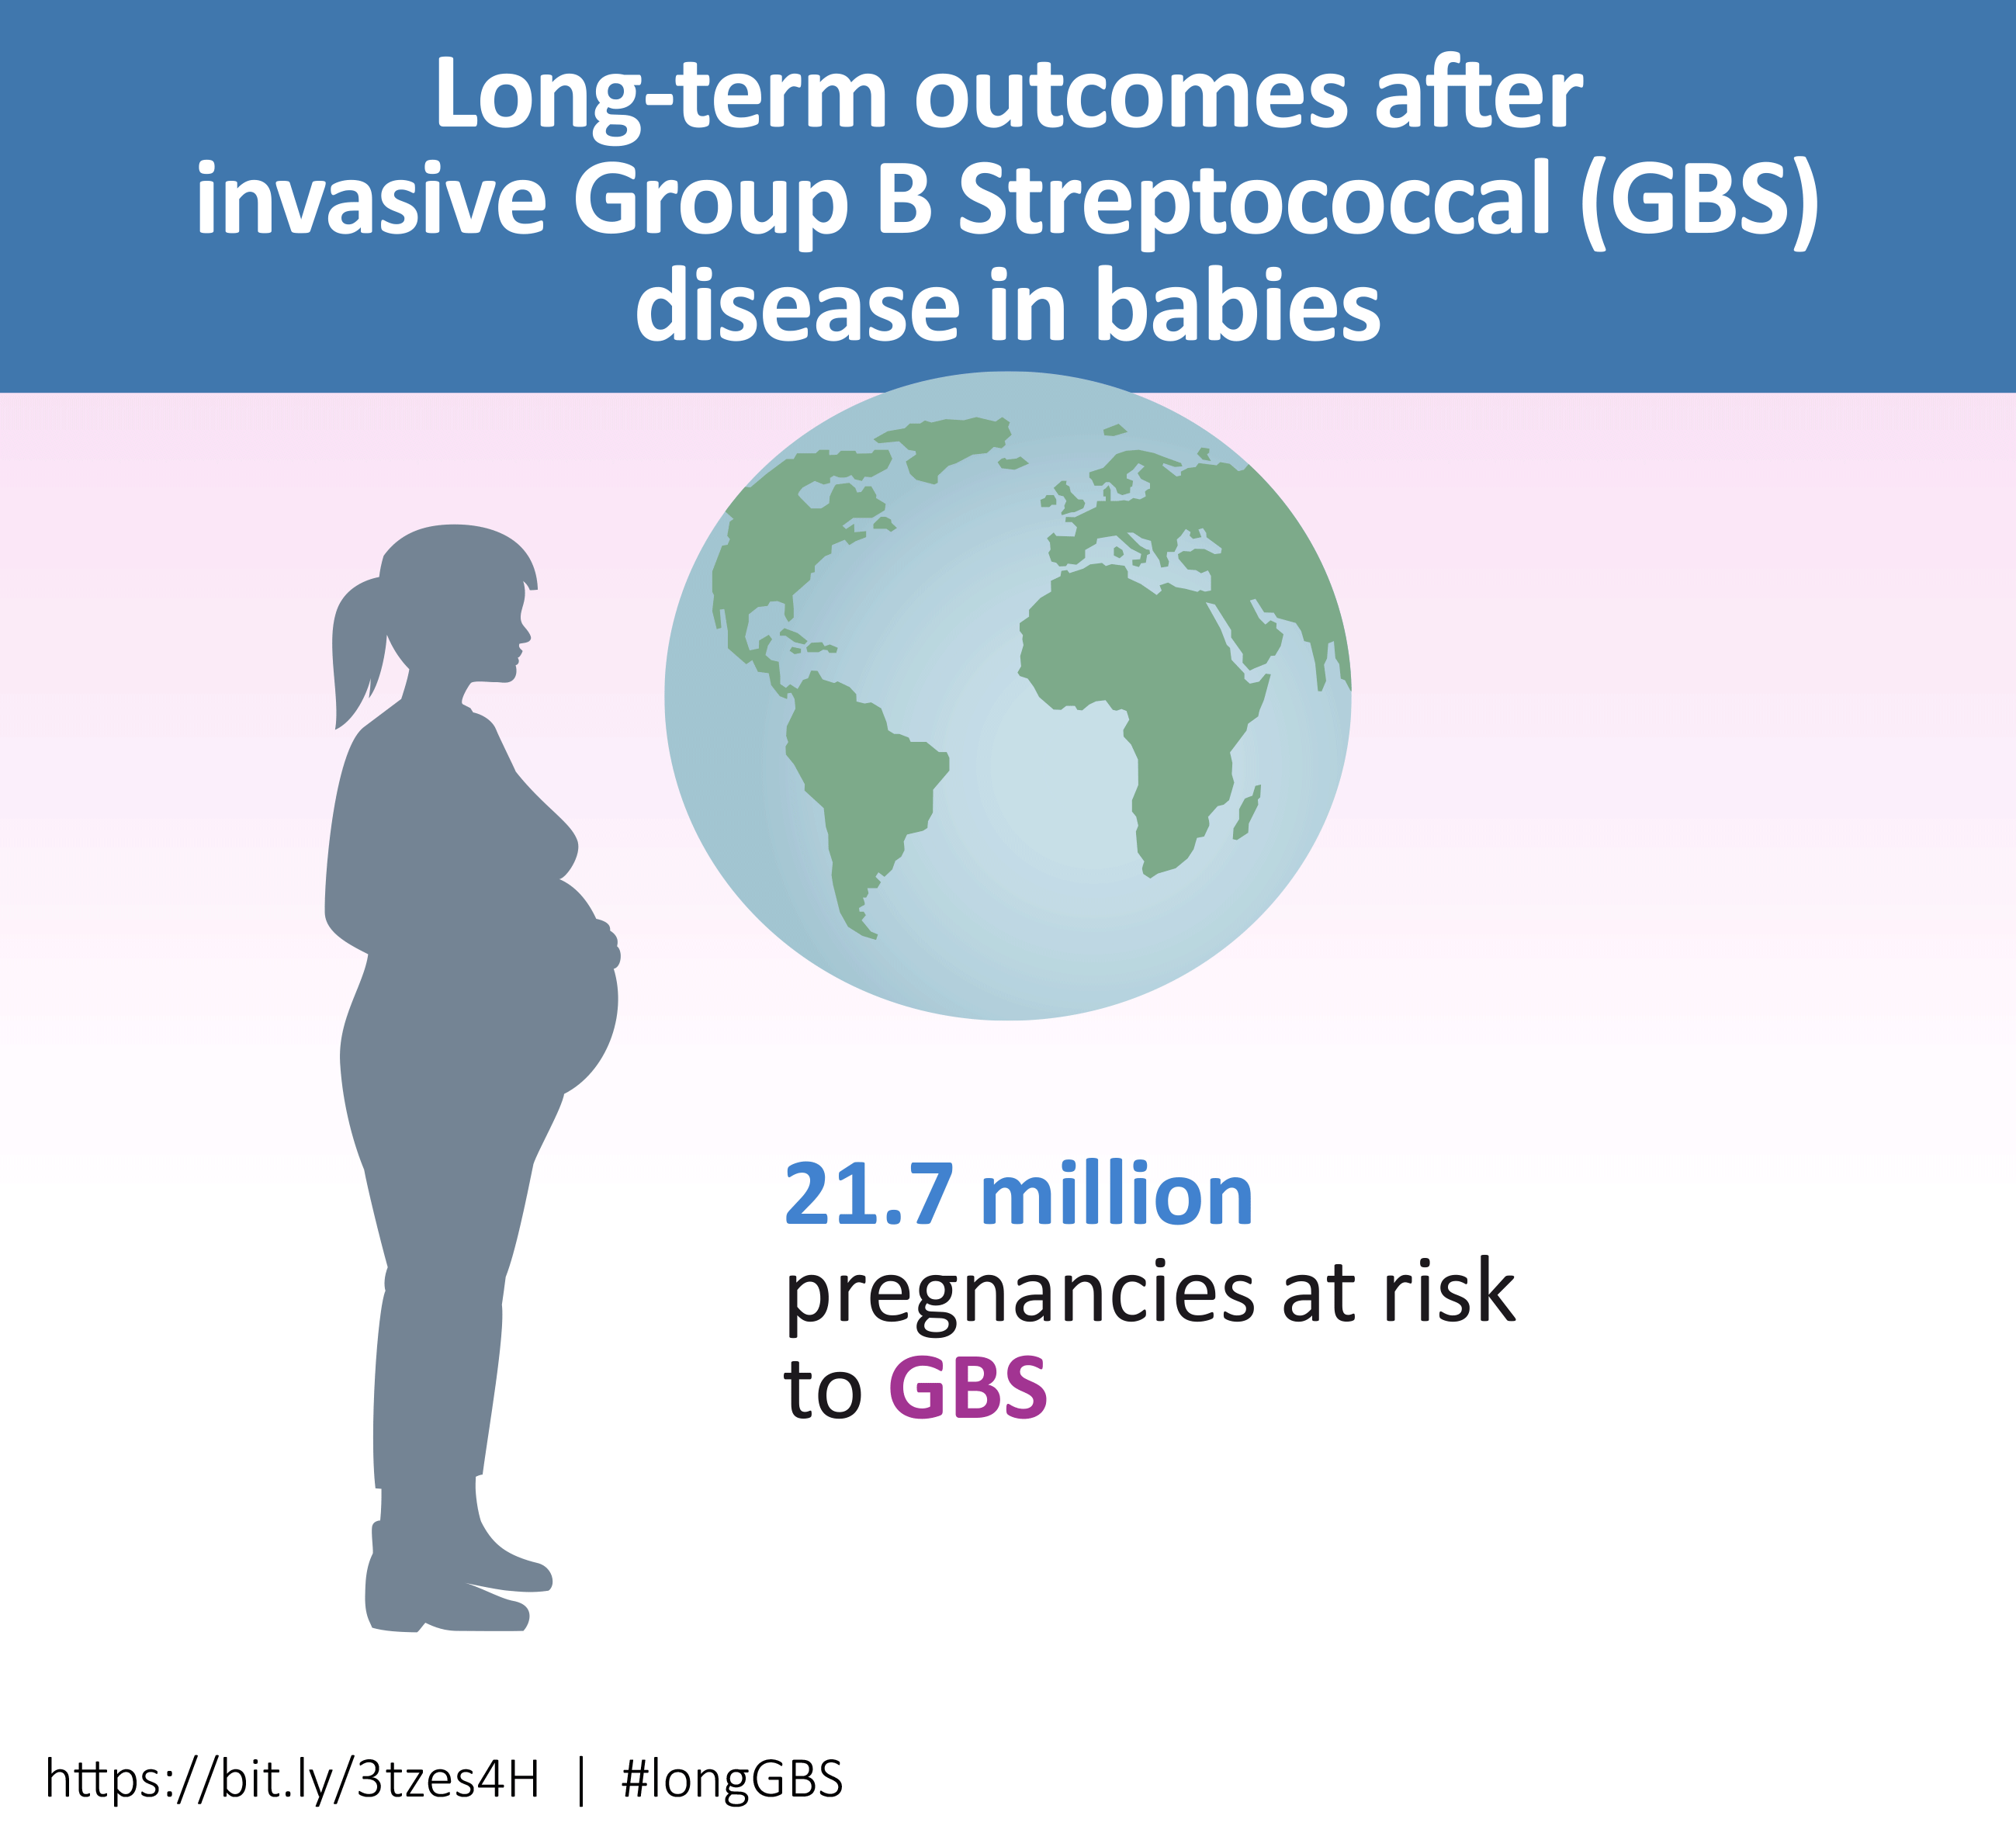 Long-term outcomes after invasive Group B streptococcal disease in babies